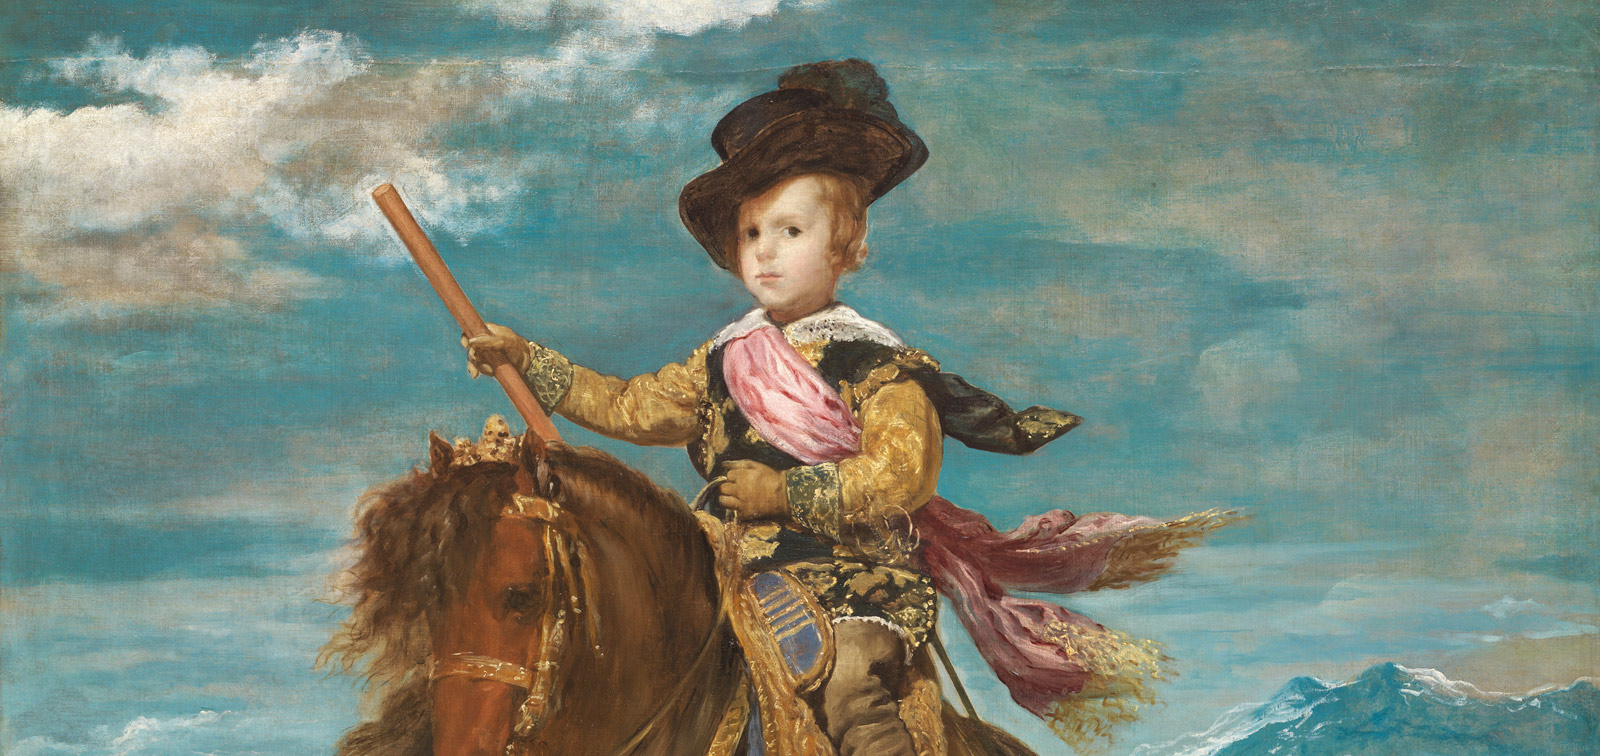 Velázquez and the Celebration of Painting: the Golden Age in the Museo del Prado